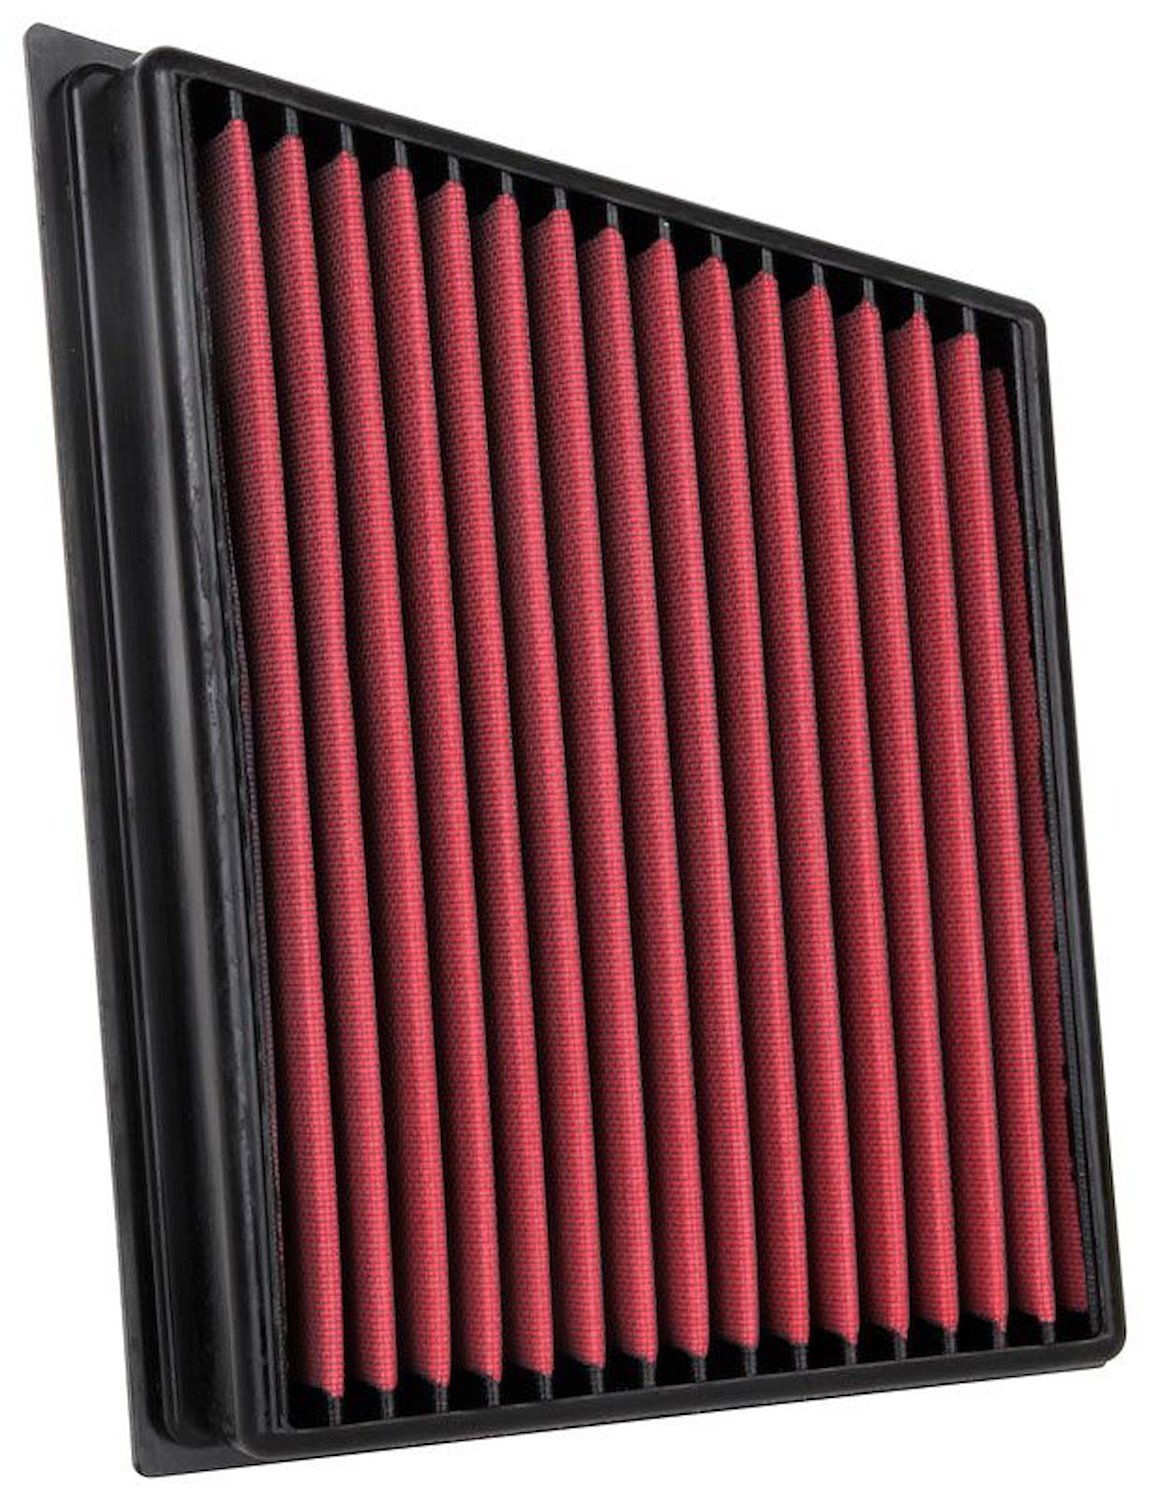 SynthaMax "Dry" OE Replacement Air Filter 2011-2016 Chevy Silverado/GMC Sierra 2500, 3500 HD 6.6L V8 Diesel